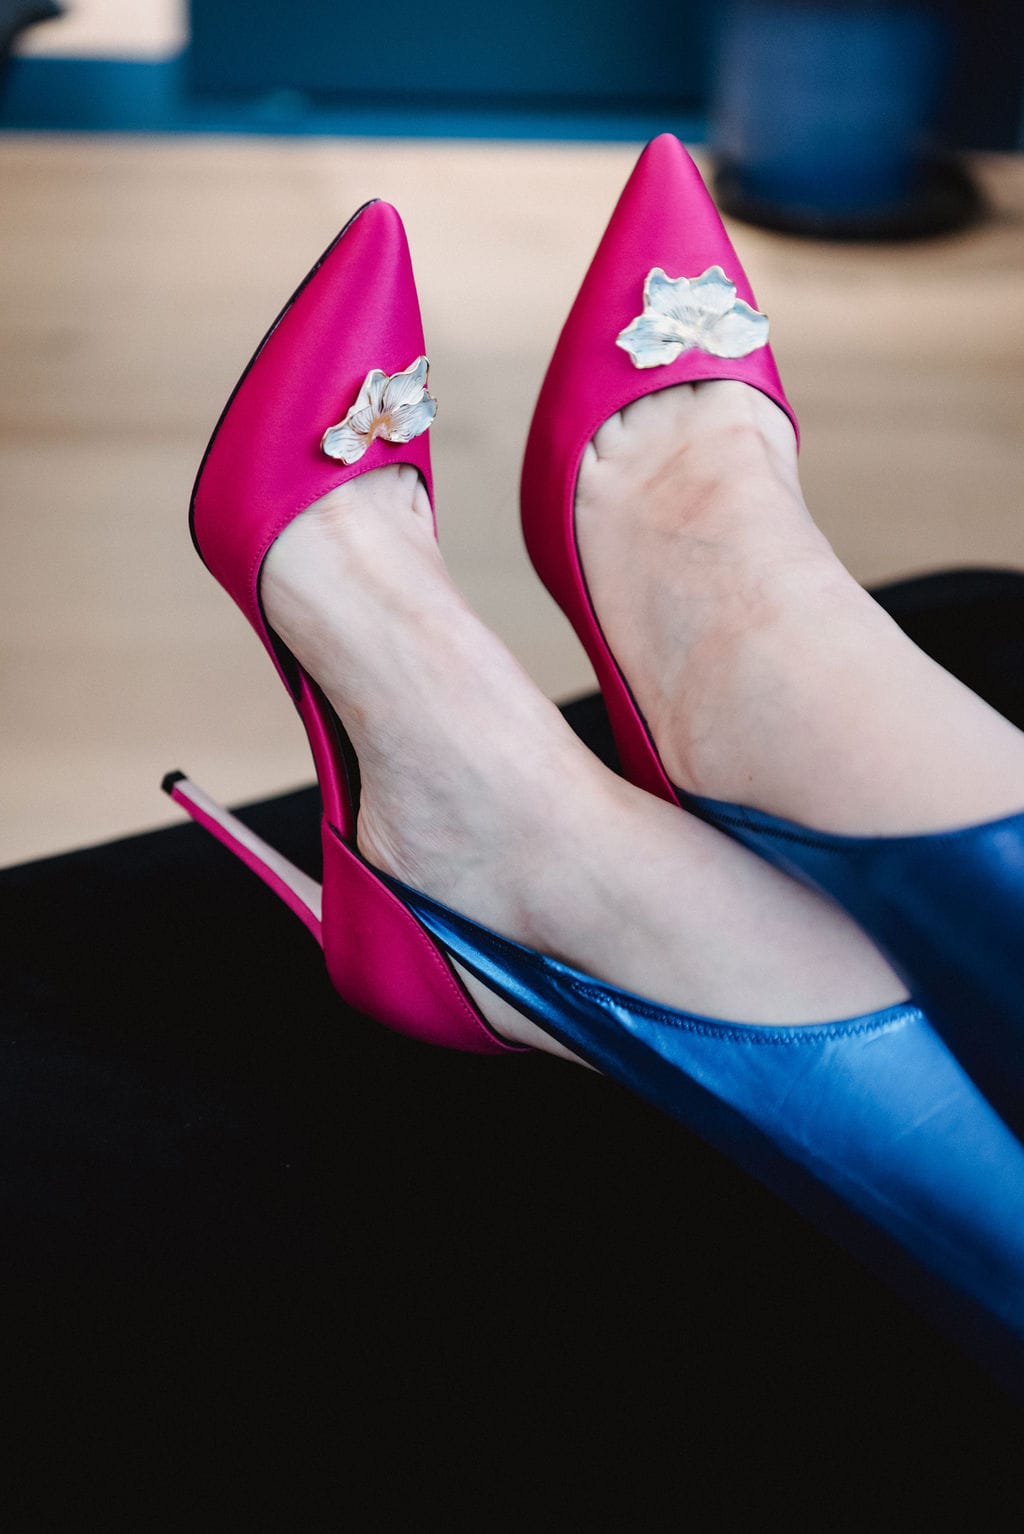 Georgiana Ghiciuc discusses creating timeless heels to innovate ethical luxury